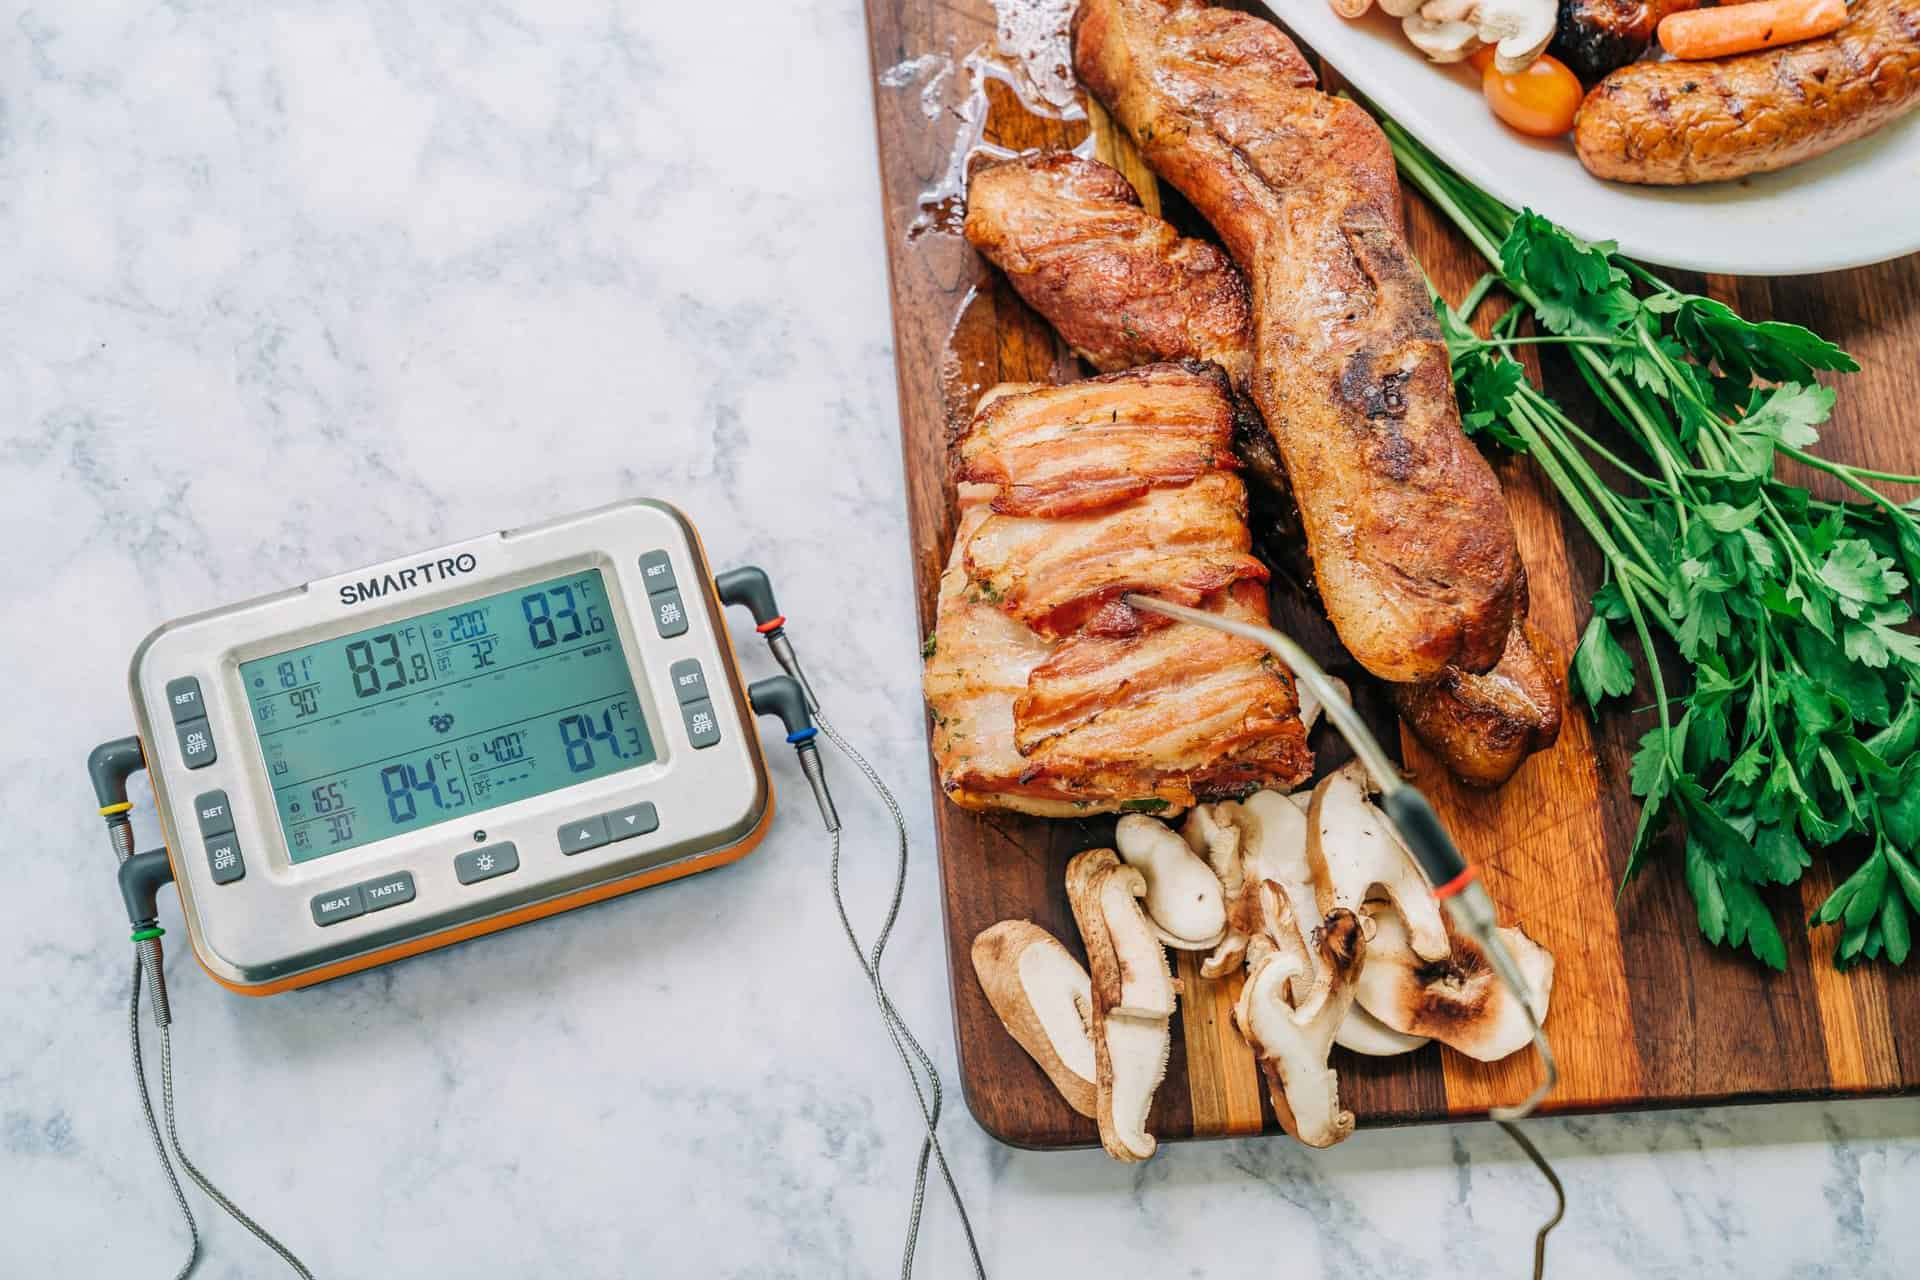 Smart Wireless Meat Thermometer with 4 Probes, Wireless Range Meat